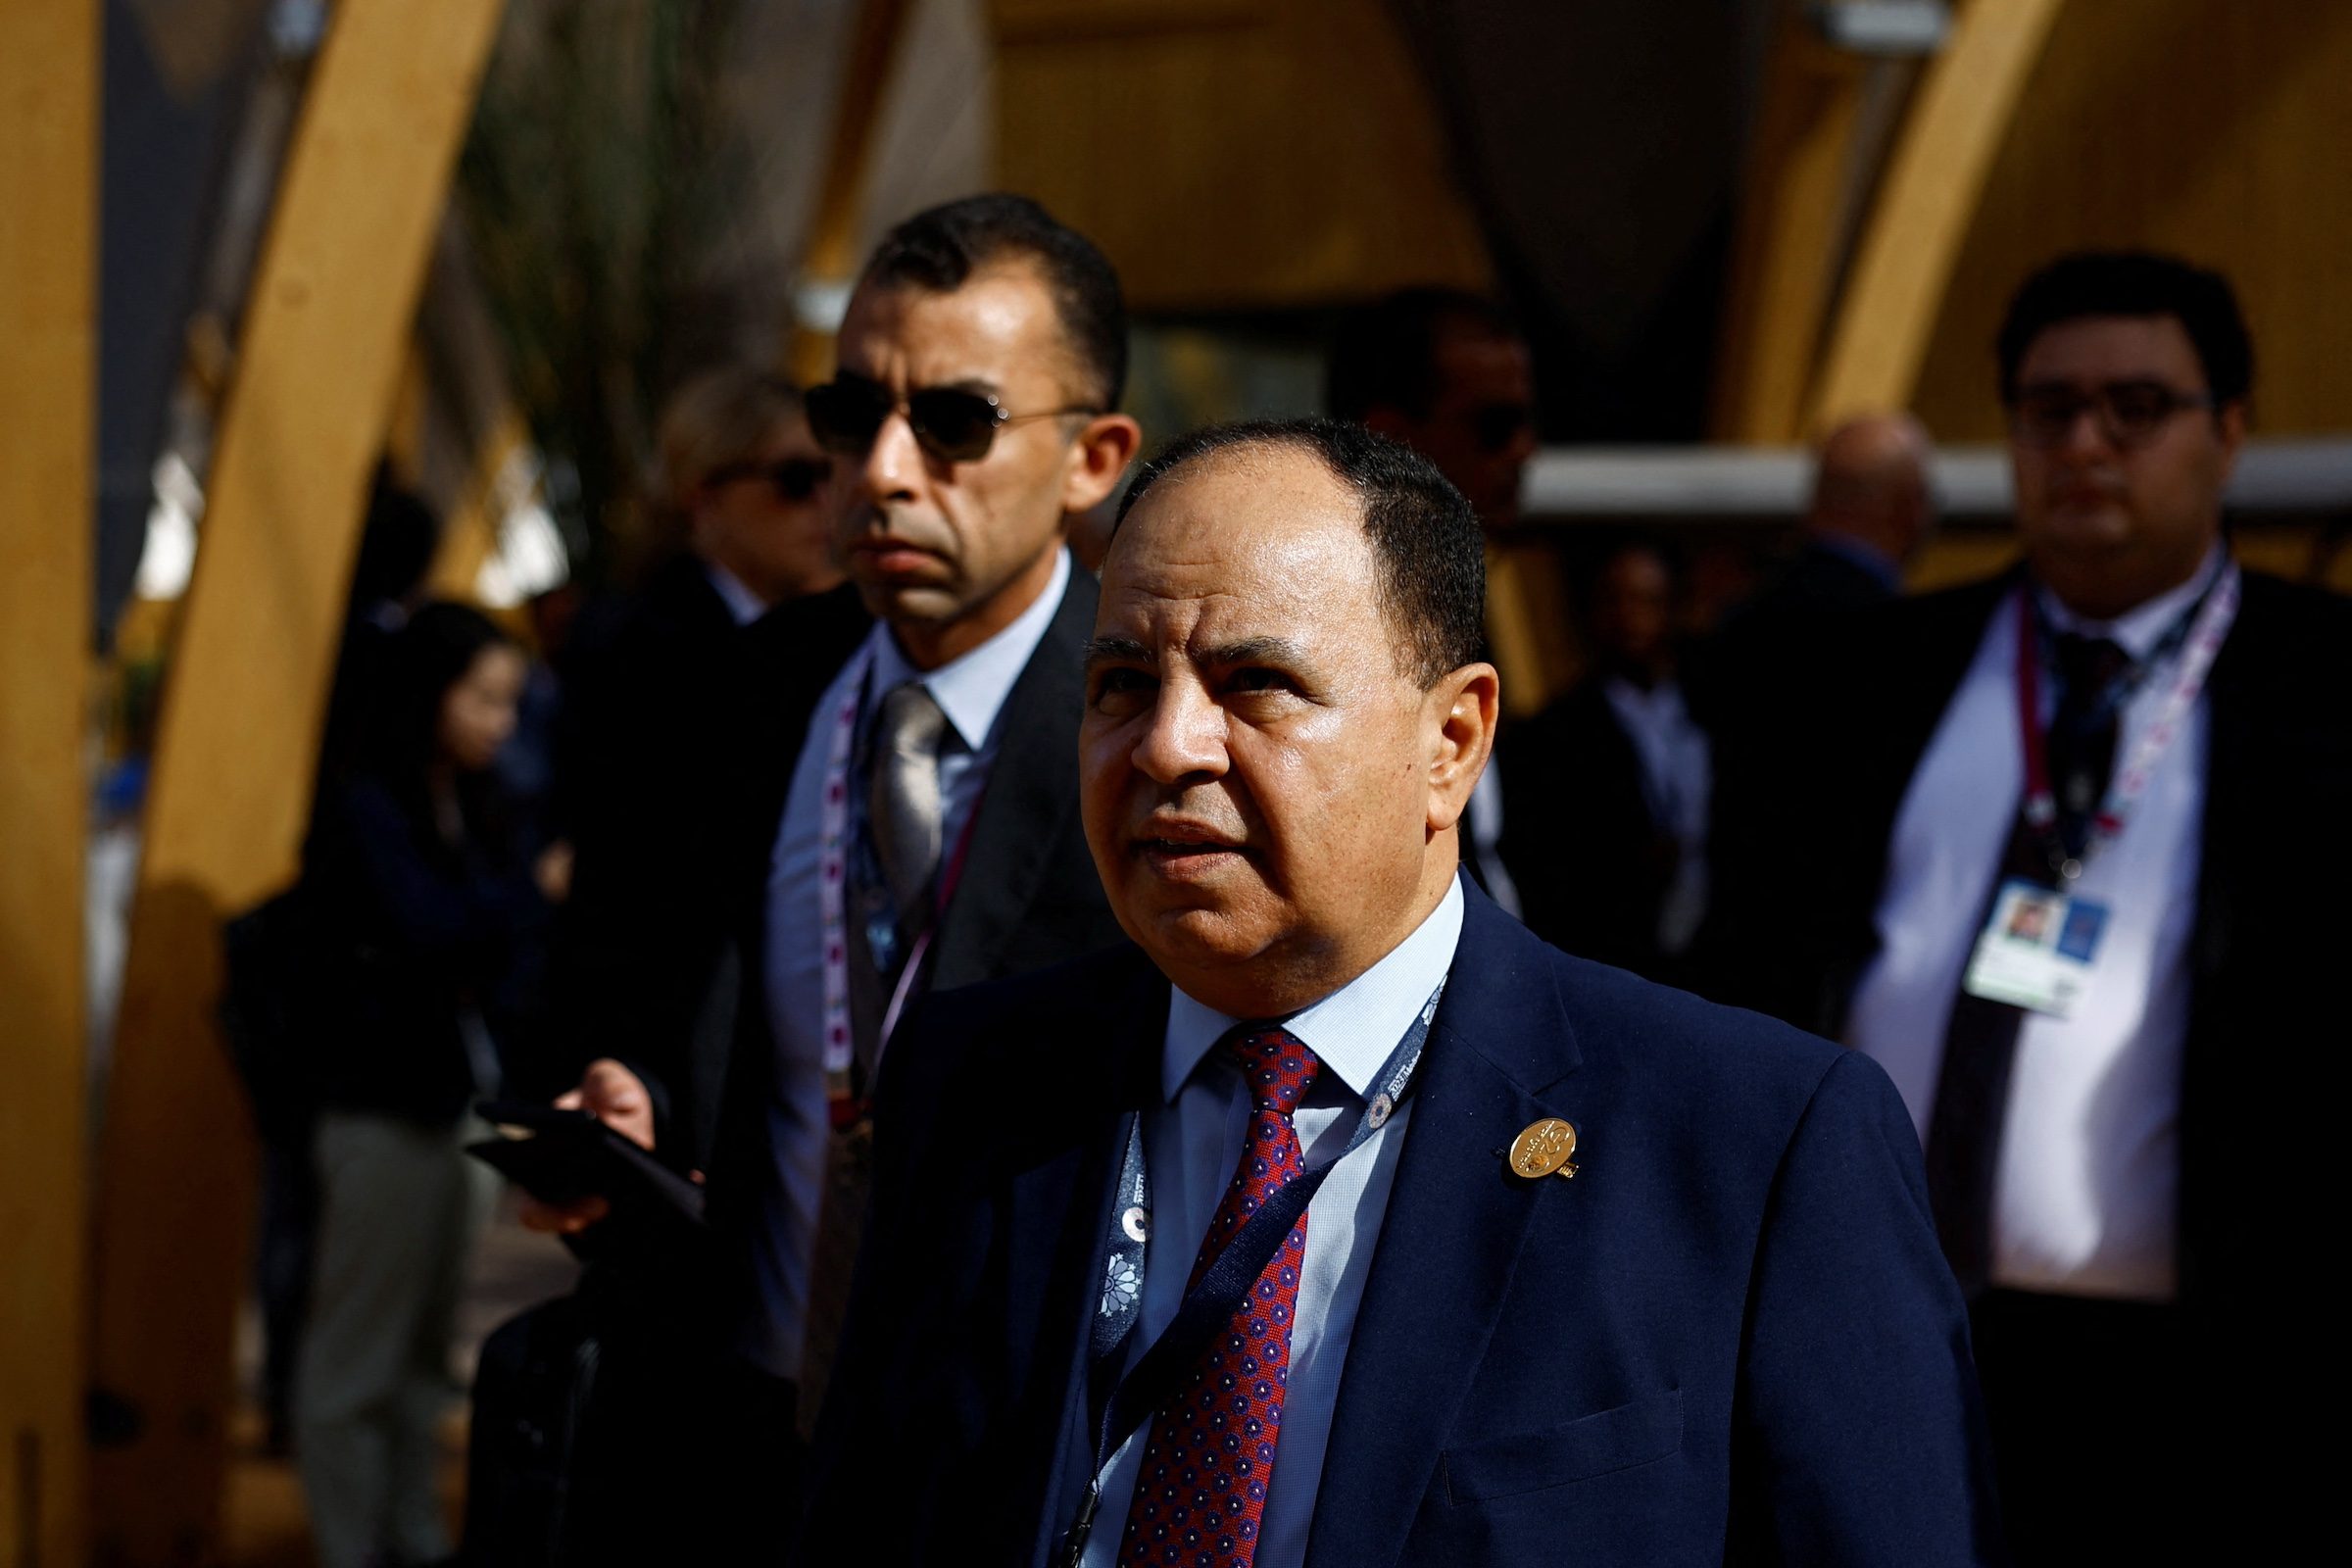 Mohamed Maait, Egypt's finance minister, at an IMF/World Bank meeting in Marrakech on October 13. He said Cairo's panda bonds had a low interest rate of 3.5%